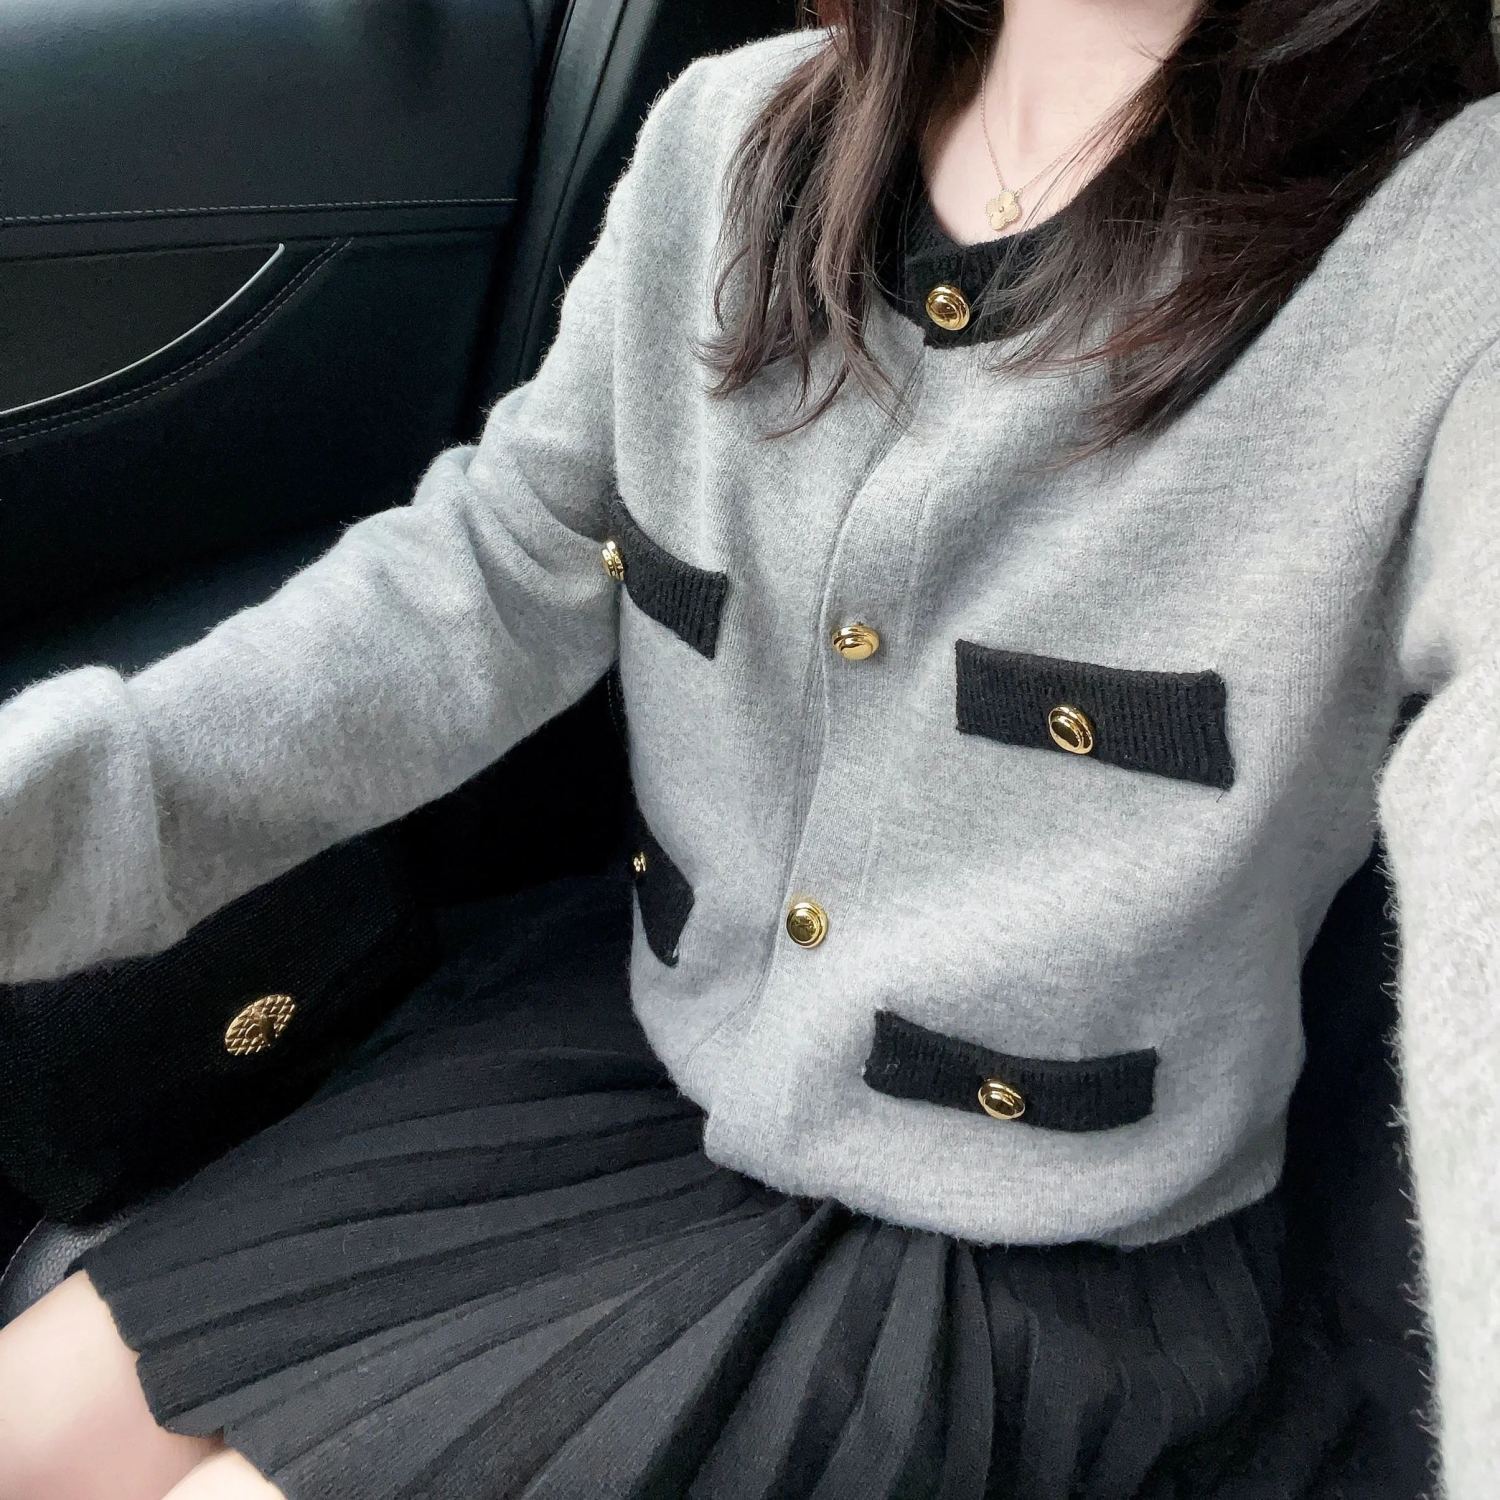 Xiaoxiangfeng knitted cardigan suit for women, autumn temperament, long-sleeved sweater jacket, high-waist slim pleated skirt, trendy